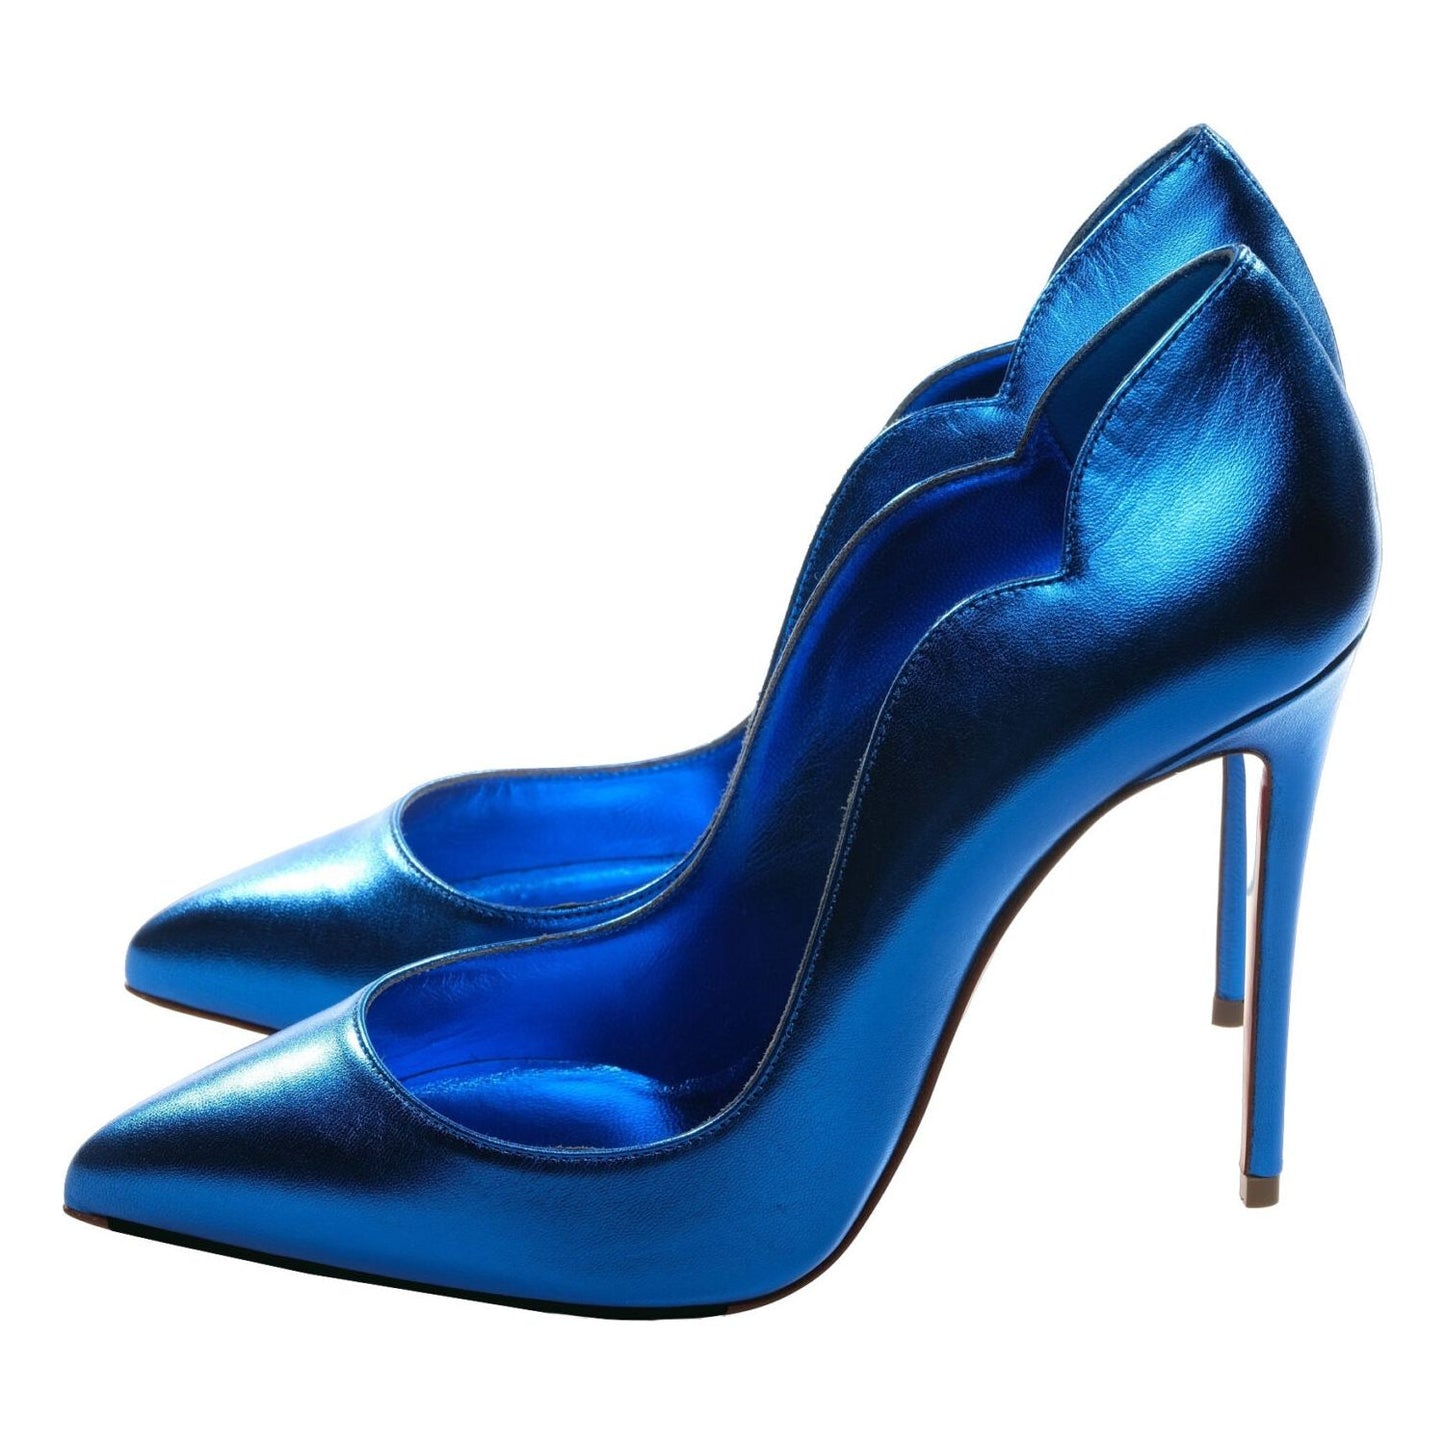 Hot Chick 100 Blue Mirrored Patent Leather High Heel Pumps